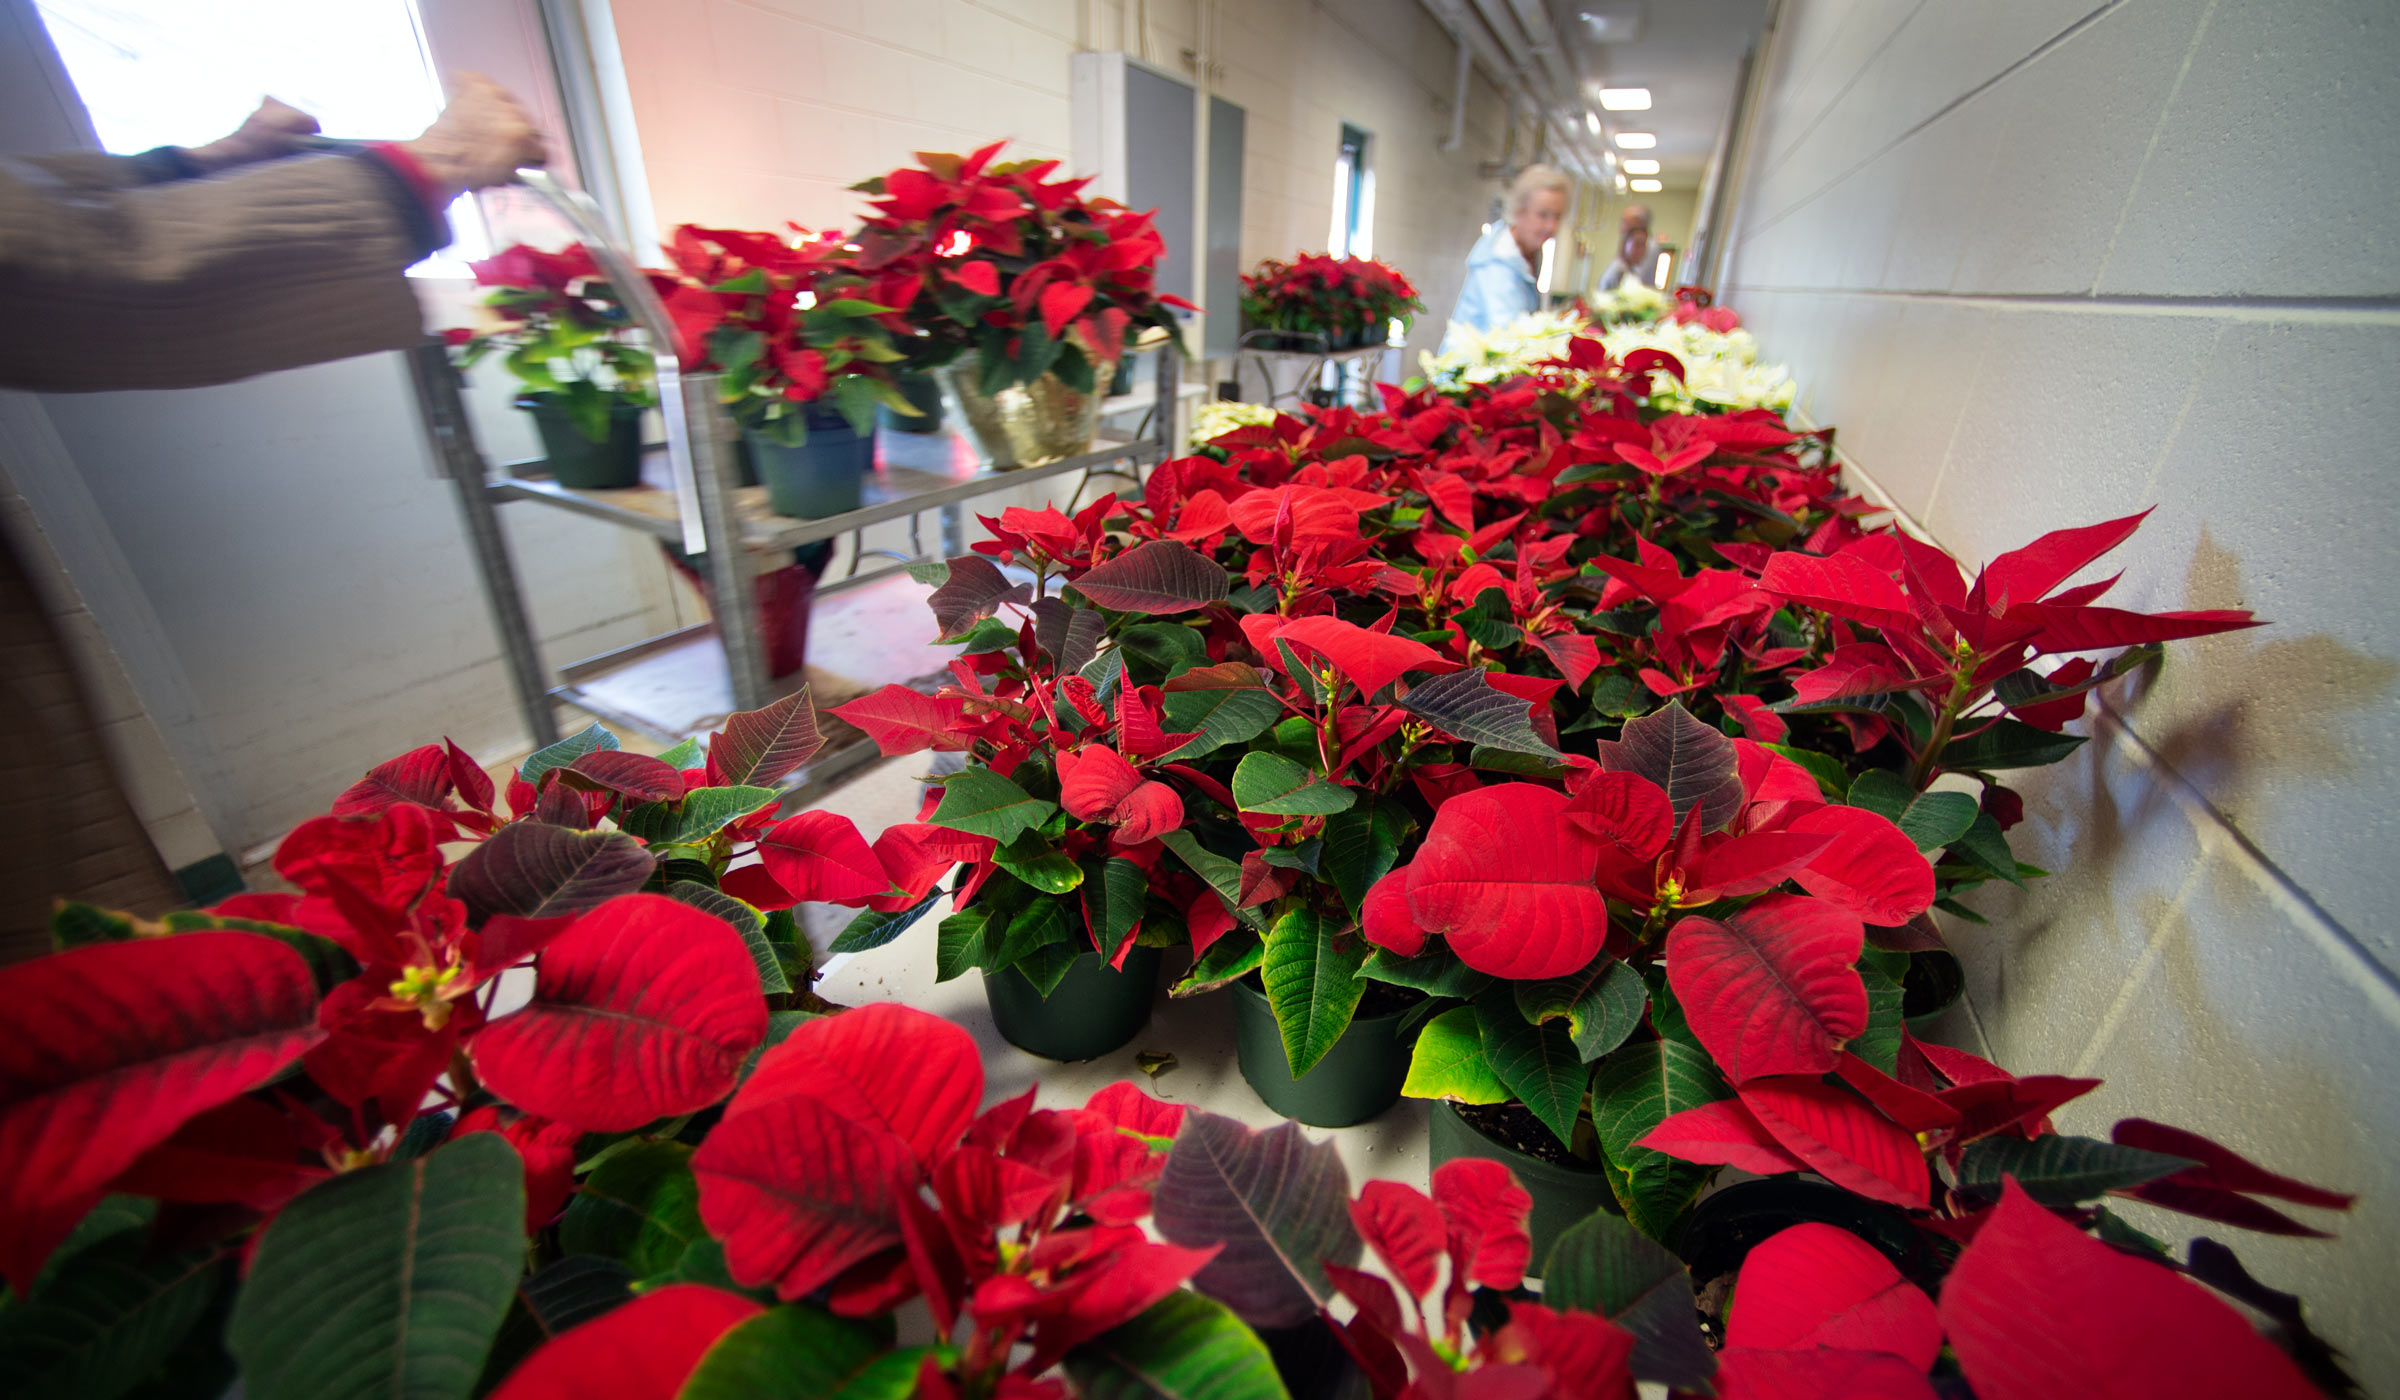 Poinsettia plants fill tables lining the hallway of the Dorman Greenhouses, with more being pushed by in a cart down the hall.